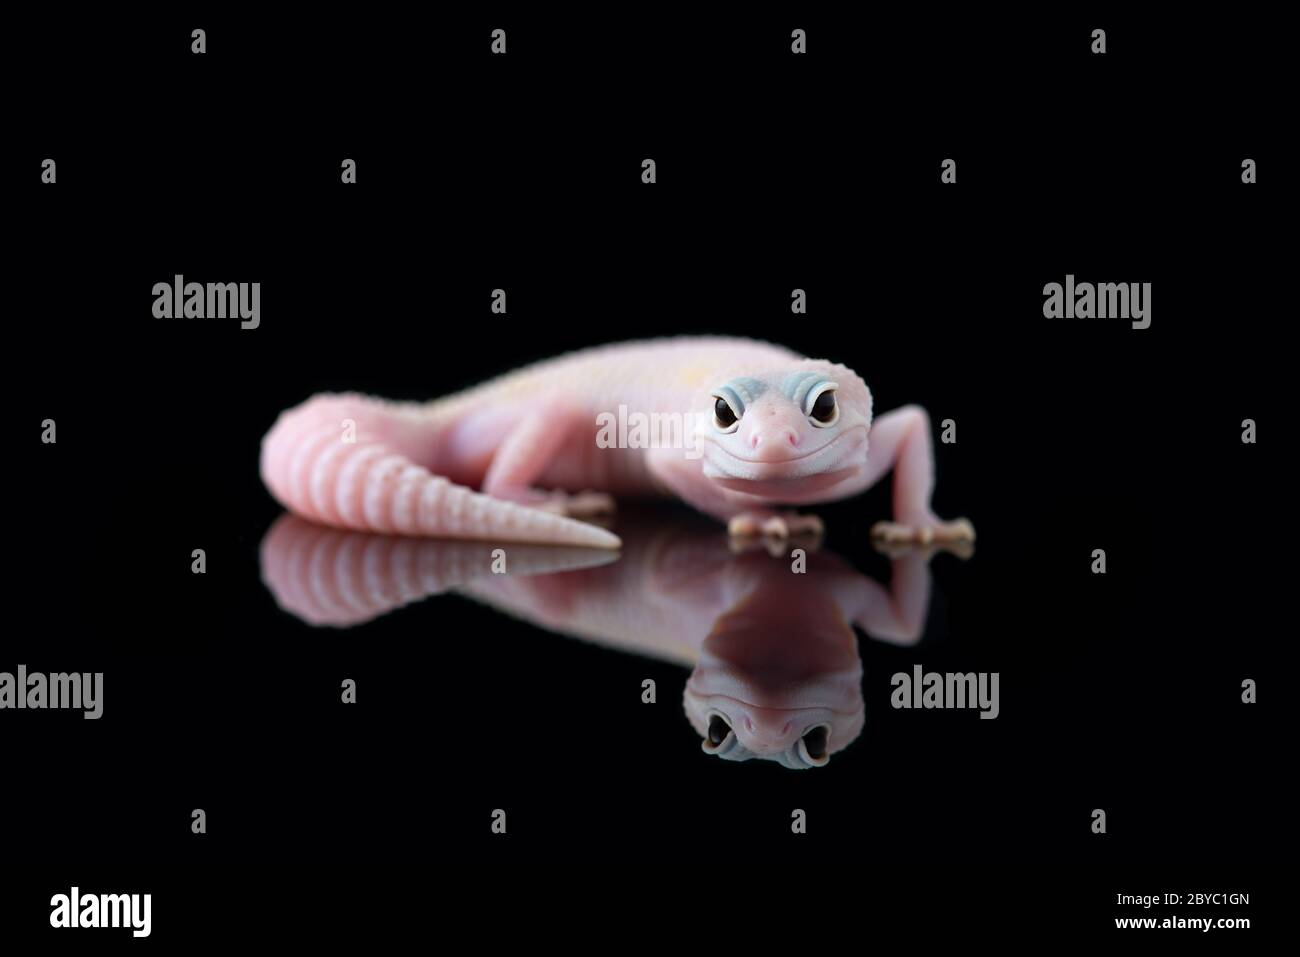 The common leopard gecko isolated on black background Stock Photo